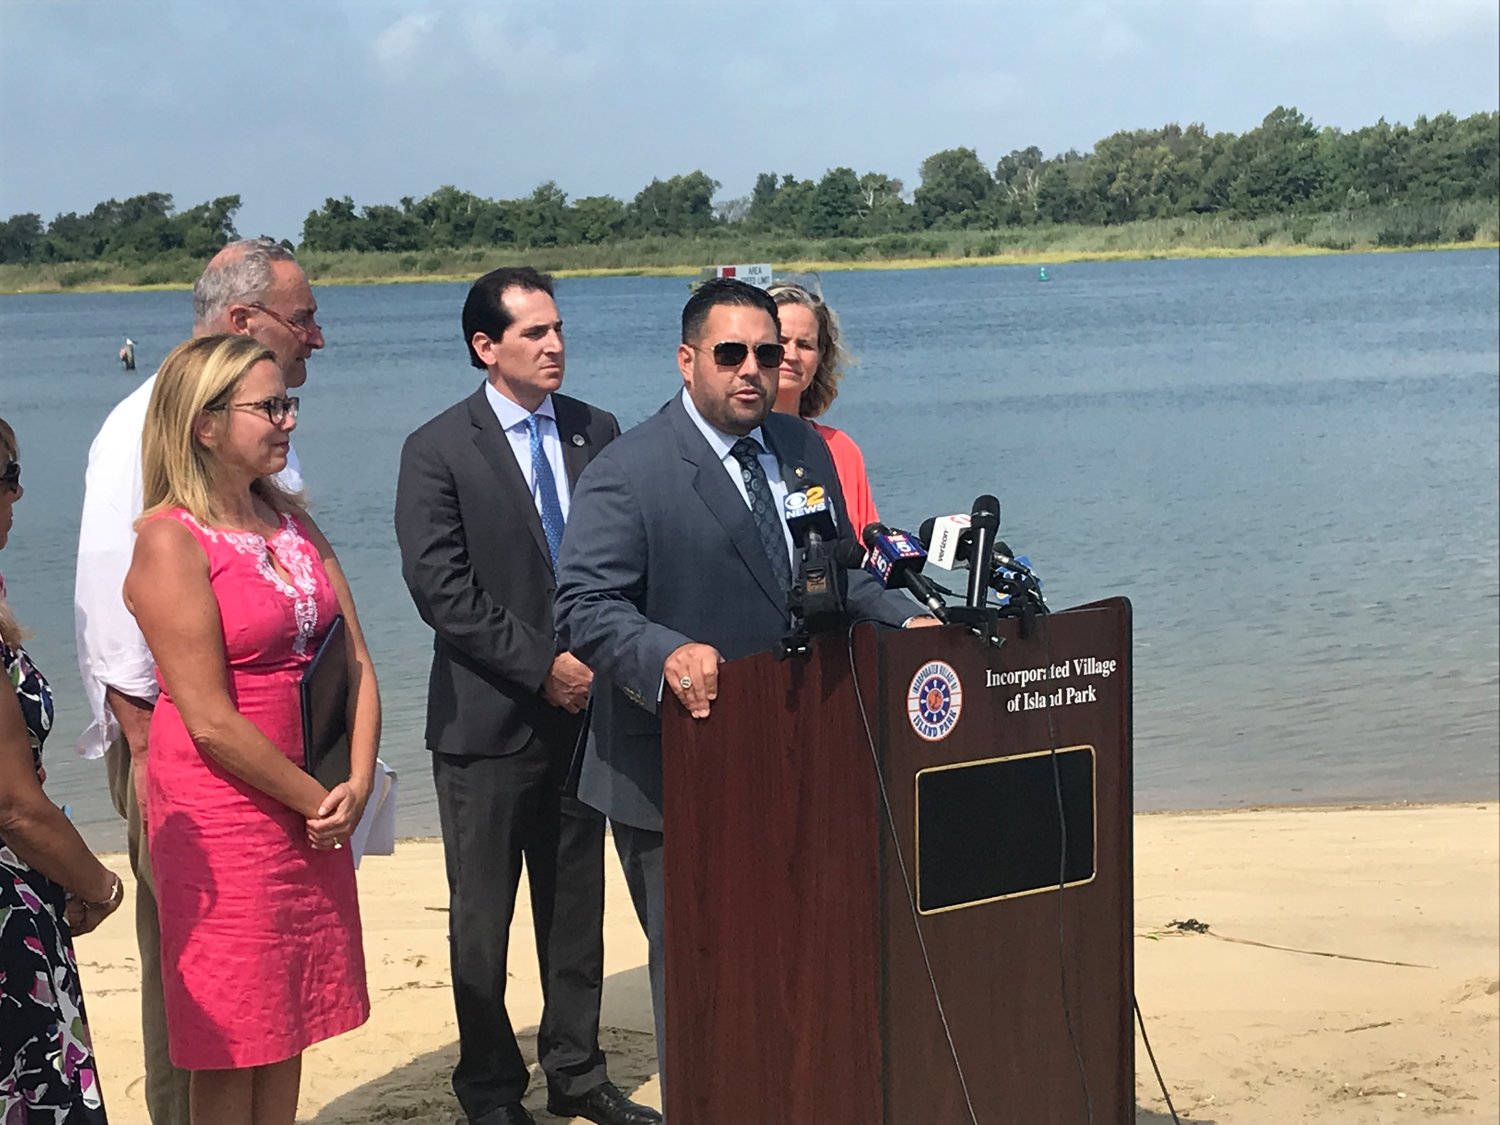 Hempstead Town Councilman Anthony D’Esposito, of Island Park, said he recalled serving as the Island Park Fire Department chief during Sandy, and said he hoped to never see such a storm devastate the area again.